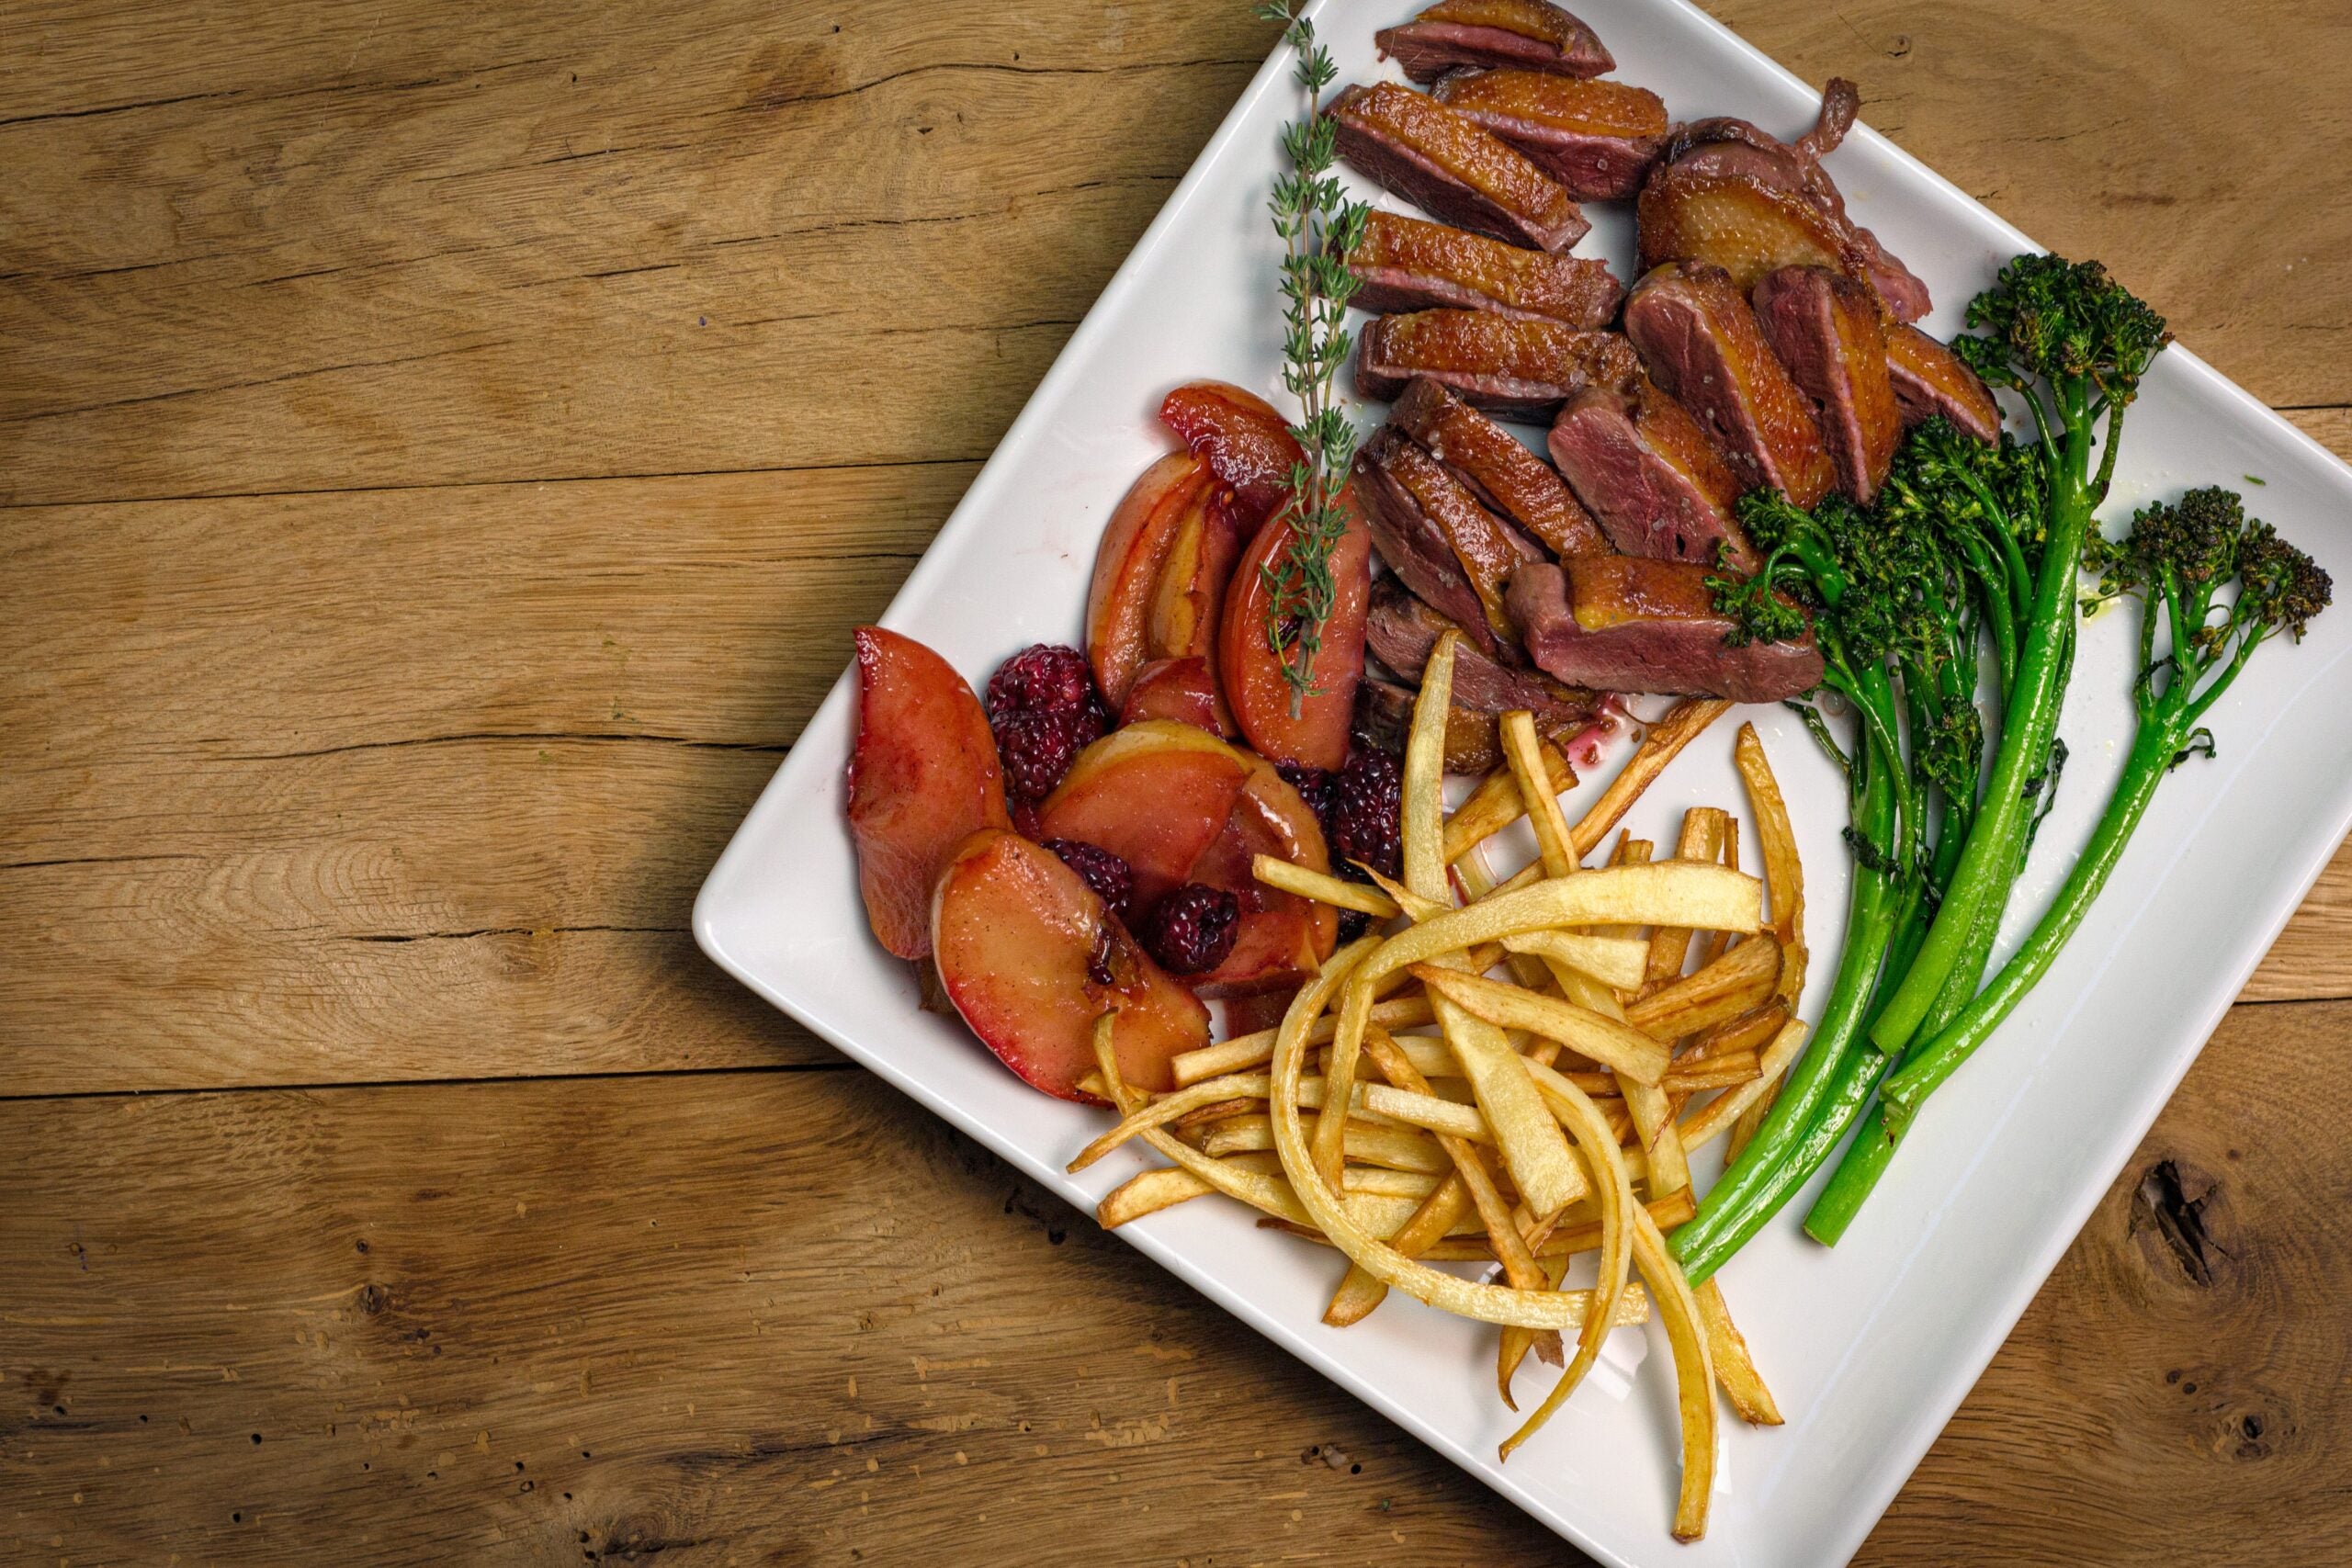 Sliced duck breast served alongside fries, broccoli rabe, and fruit on a white plate.